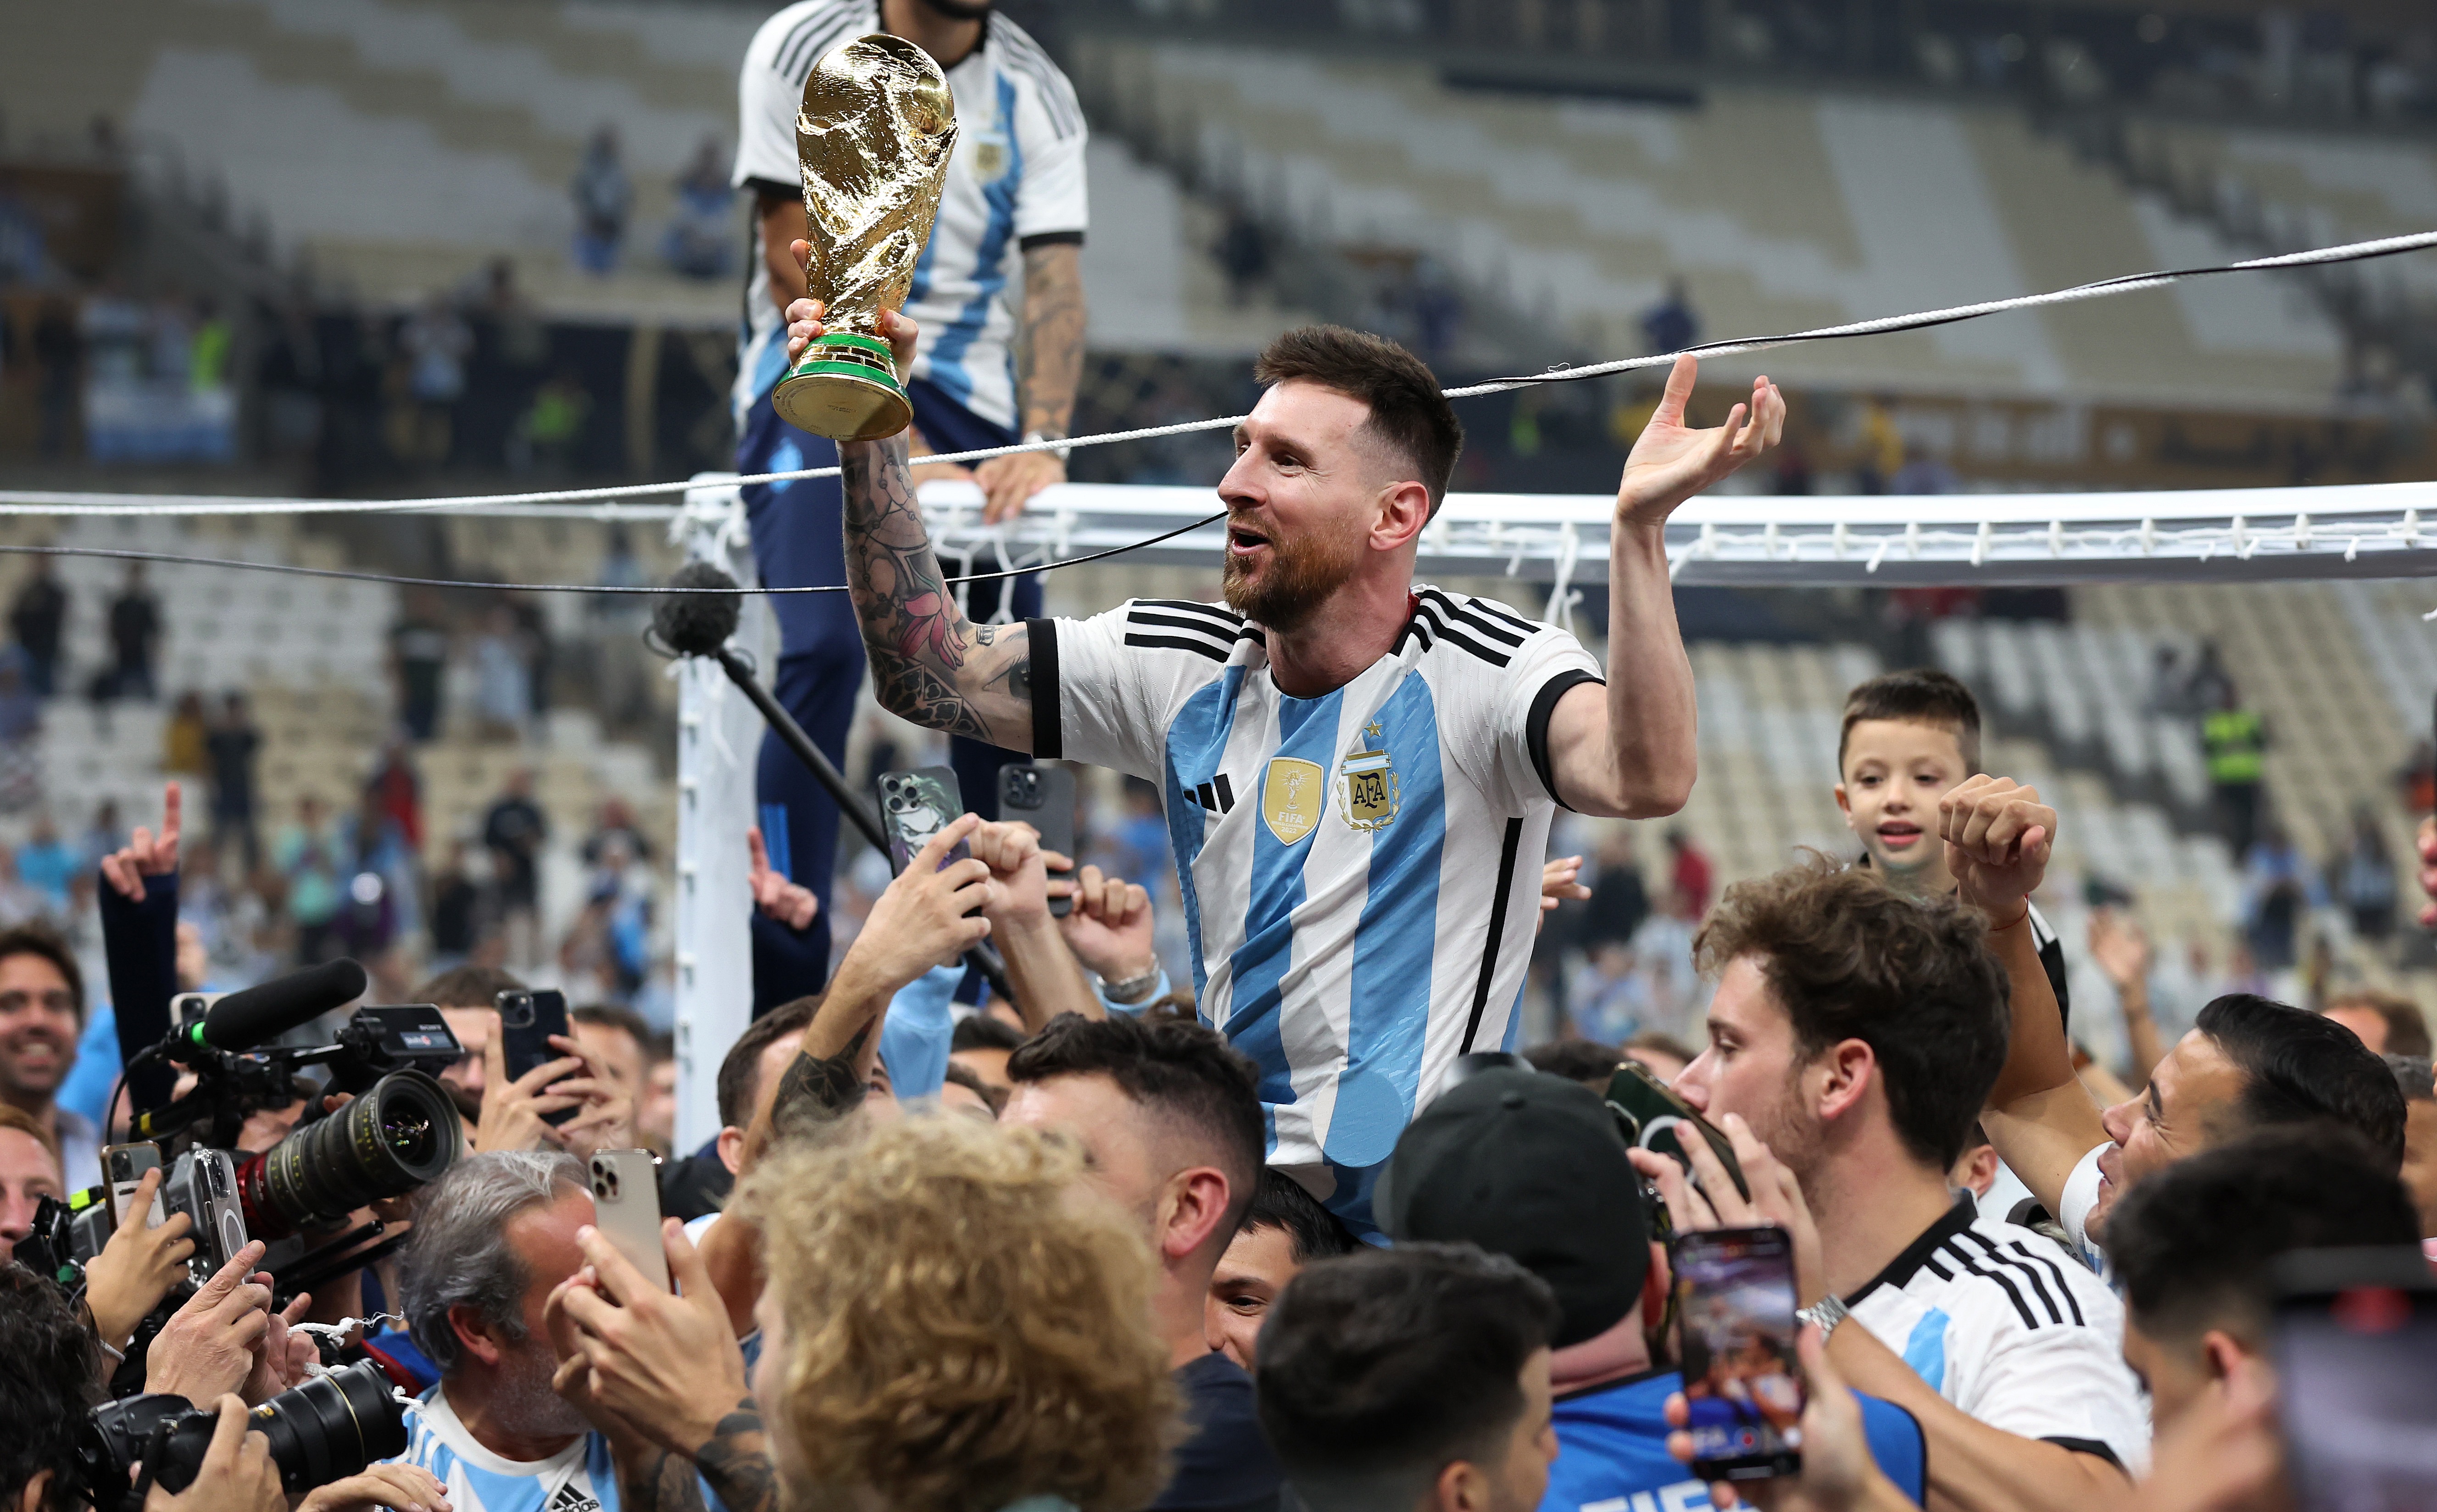 , Lionel Messi looked to sky and begged ‘Come on Diego, give it to him’ before Argentina’s World Cup winning penalty